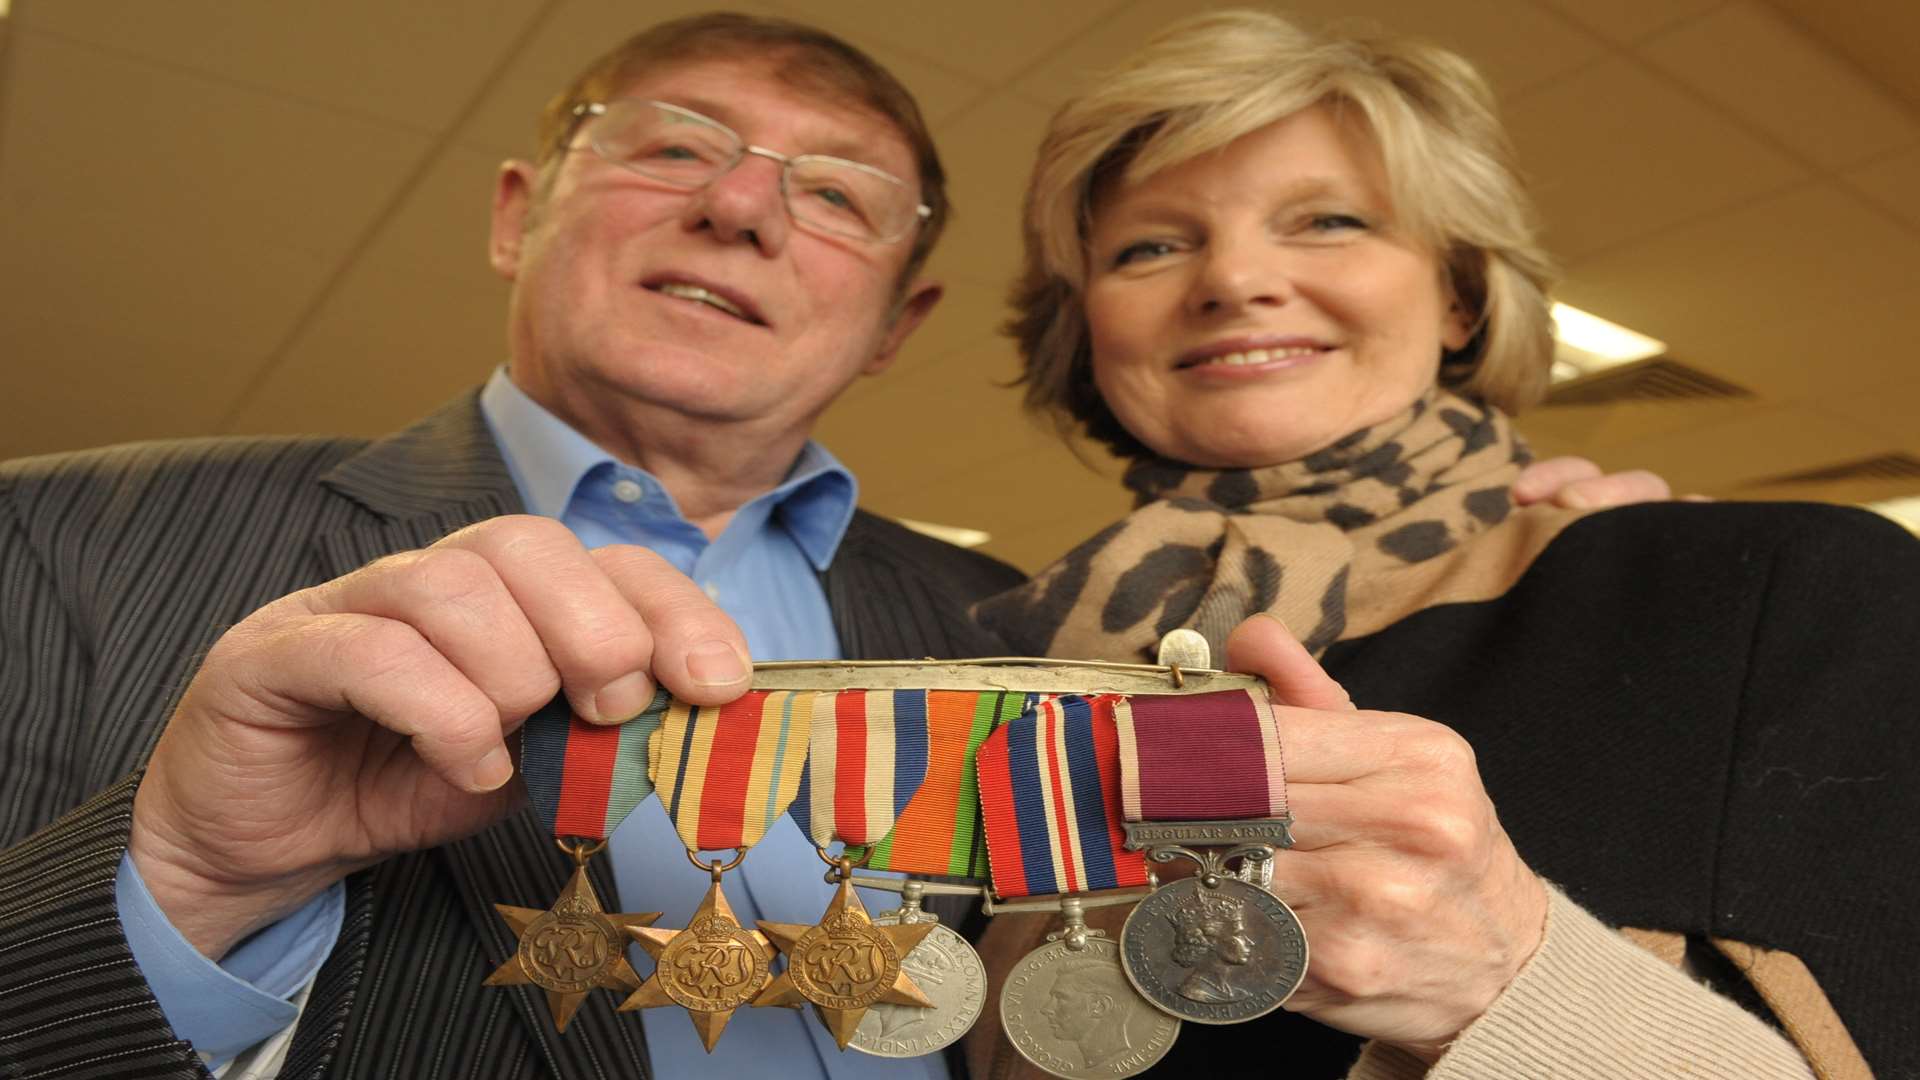 Leonard and Anne Hazeldine were reunited with the medals stolen from their home in Maidstone. Picture: Steve Crispe